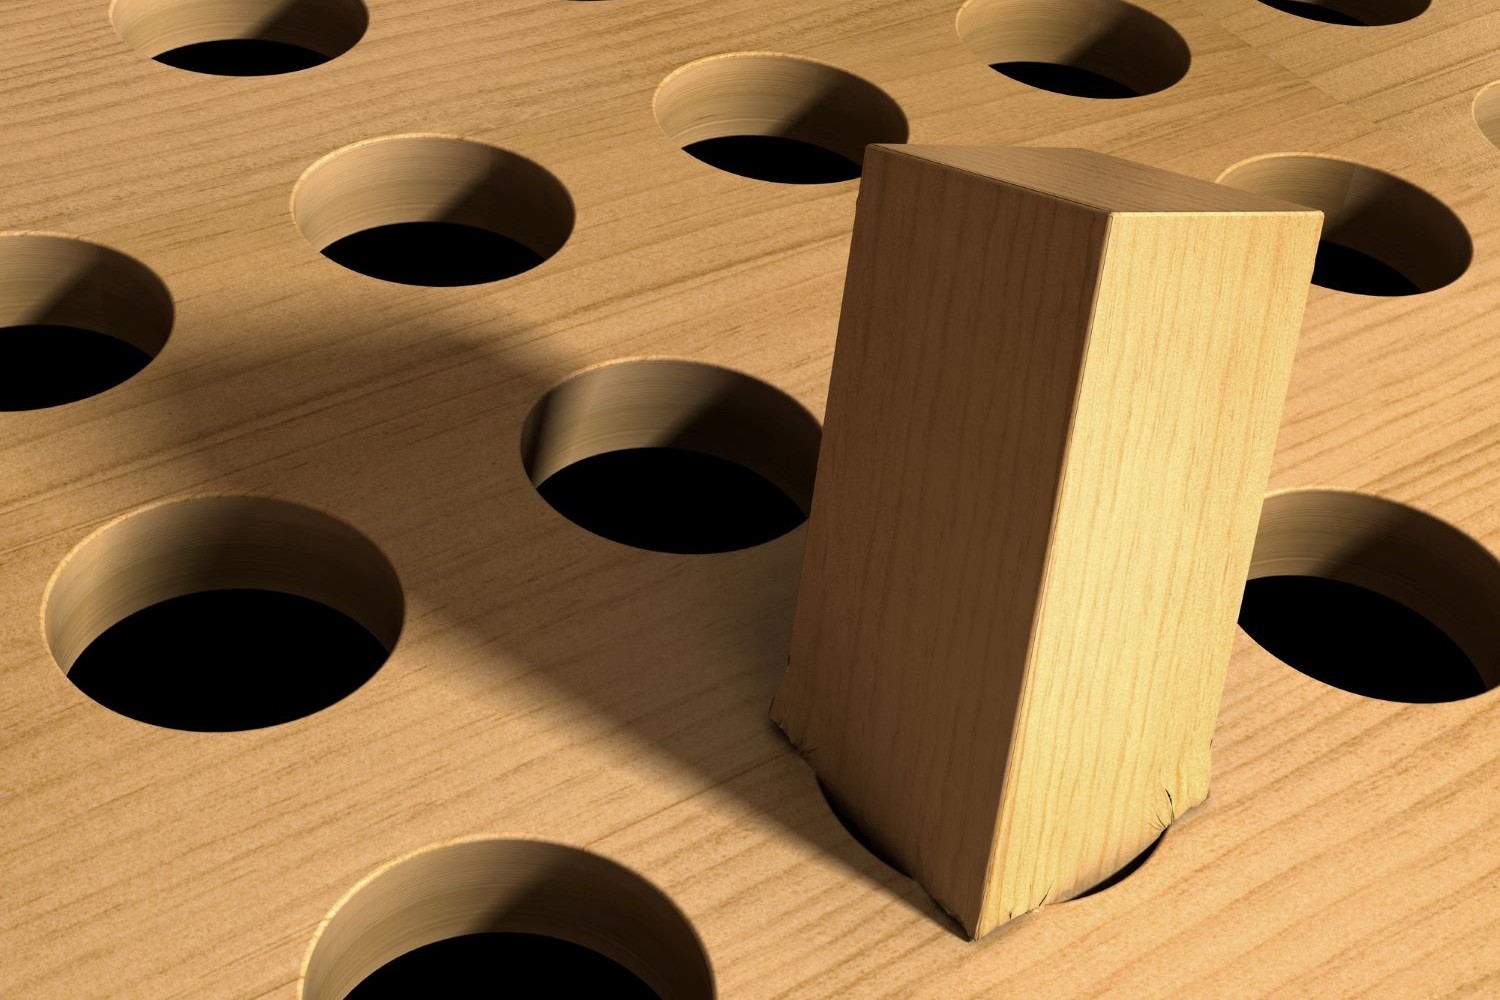 A square peg forced into a round hole